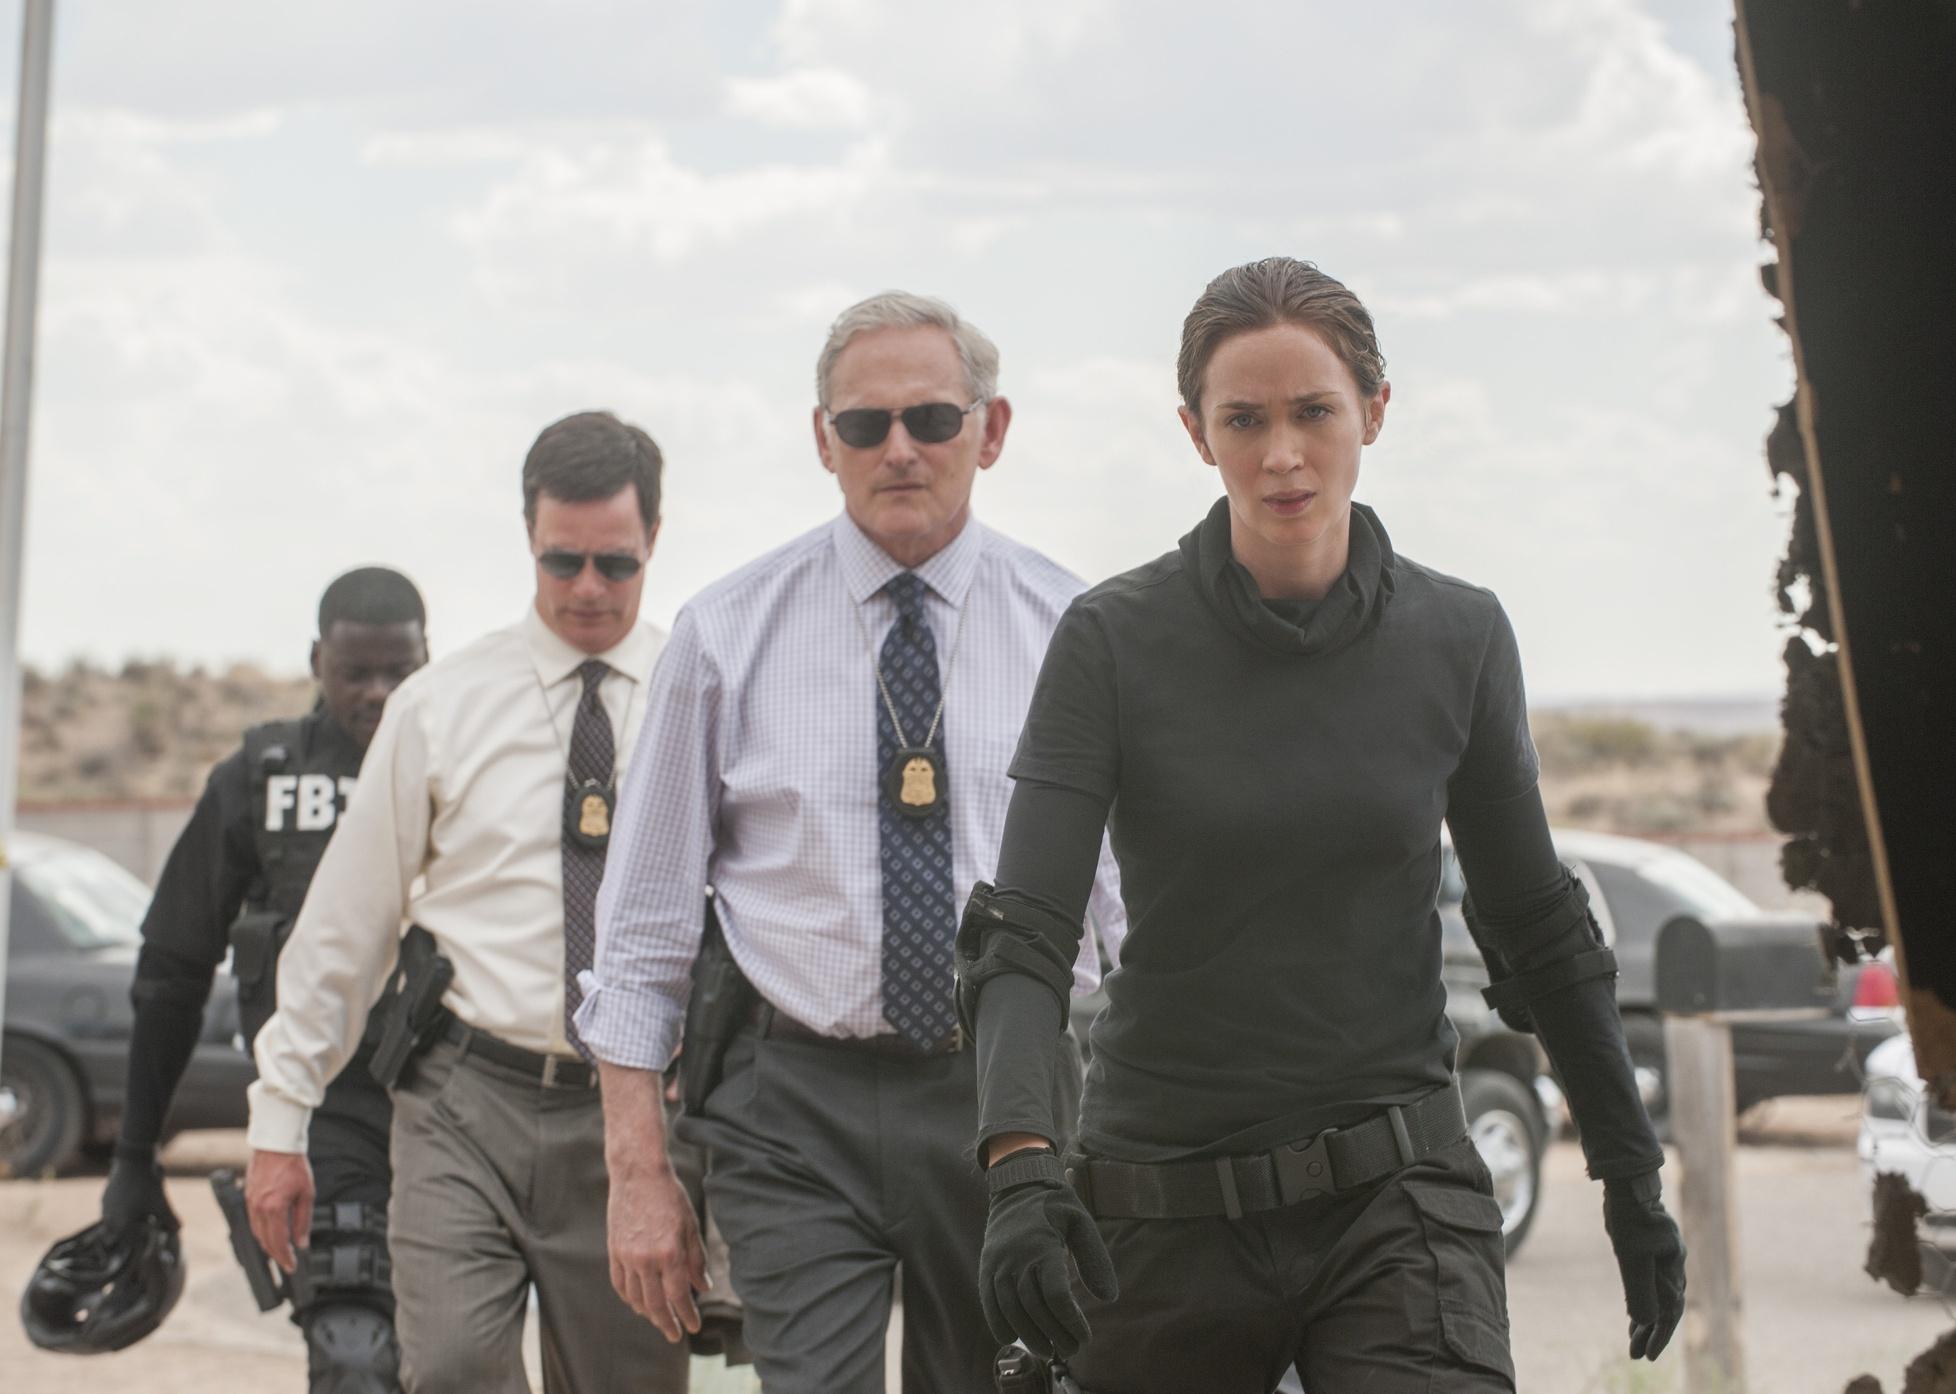 Emily Blunt and Victor Garber walk in a line of men in all black.